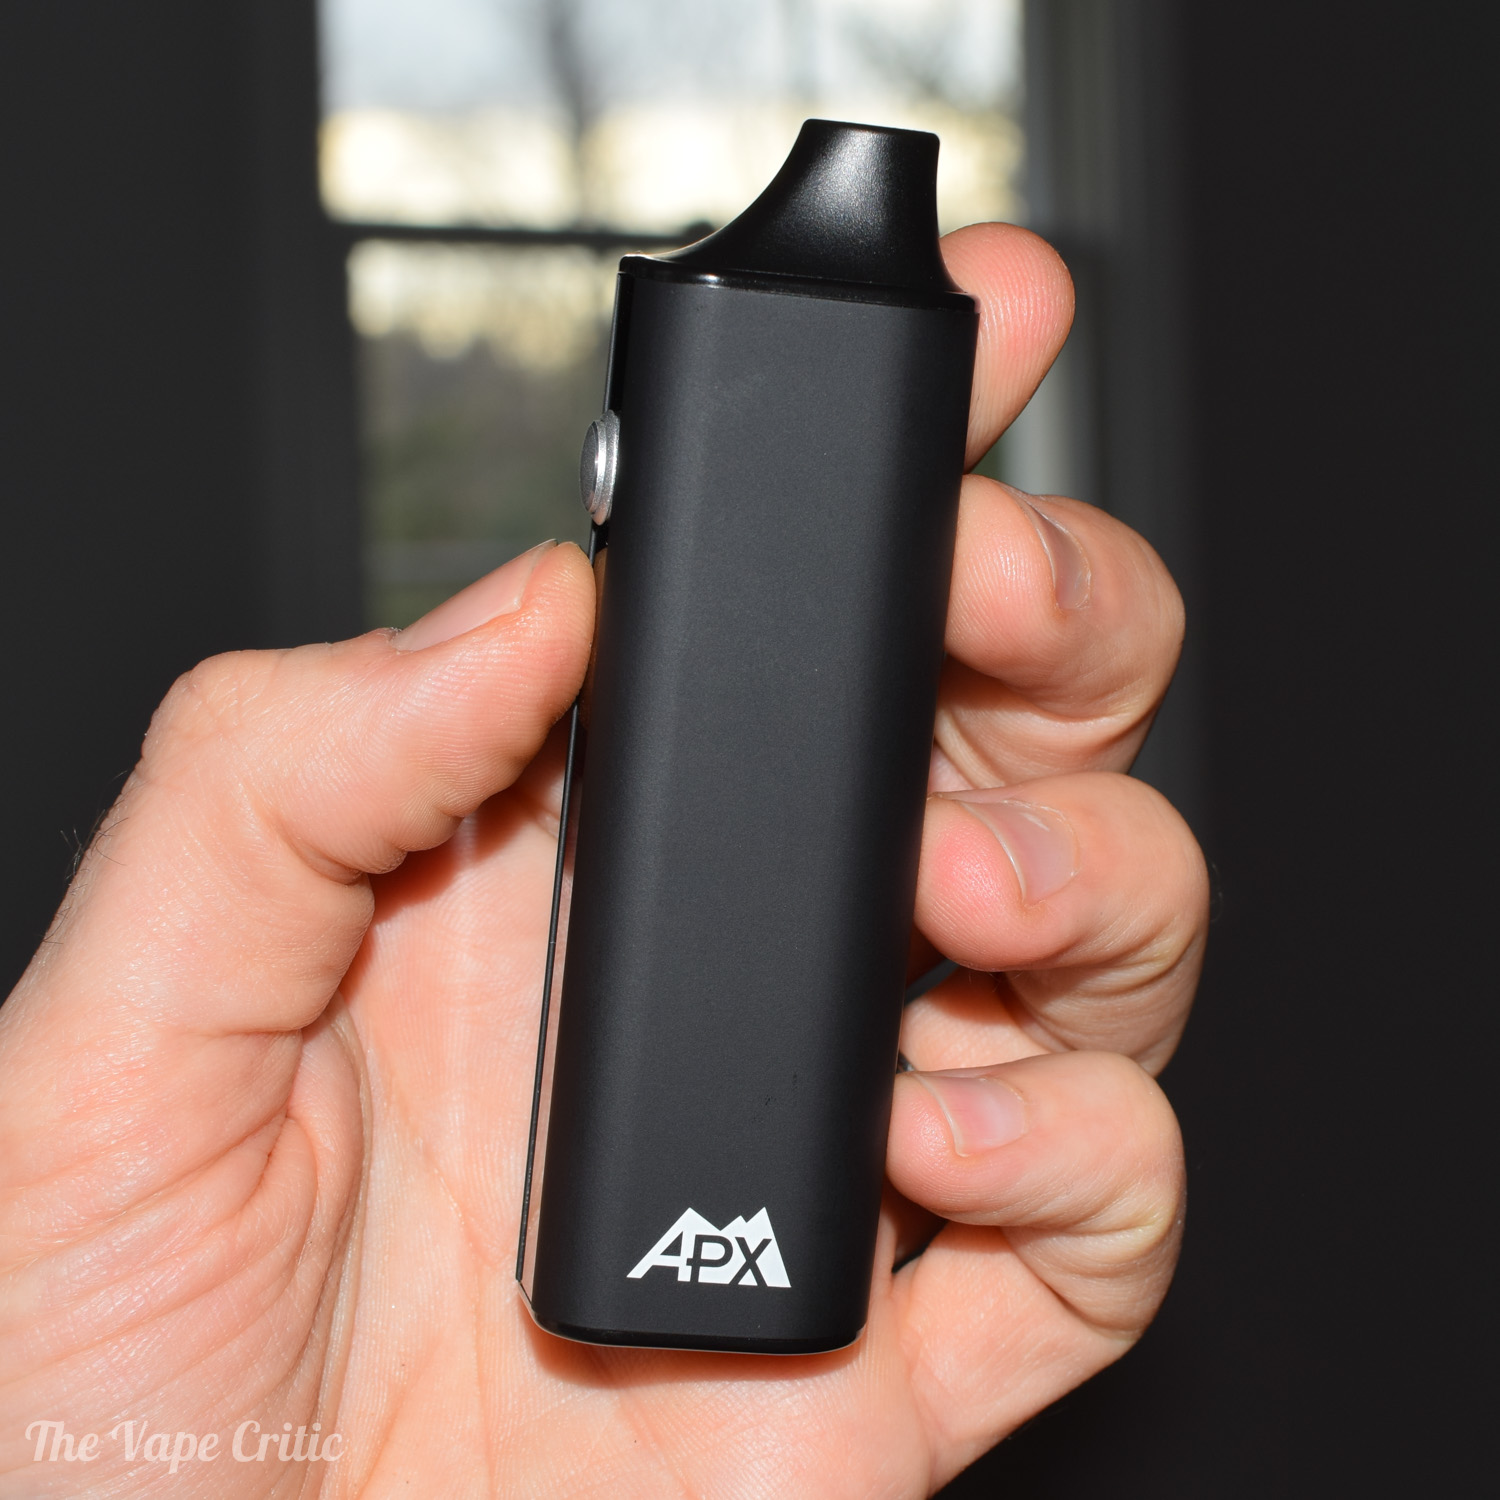 PAX Plus Vaporizer - Only $179.99 With Discount